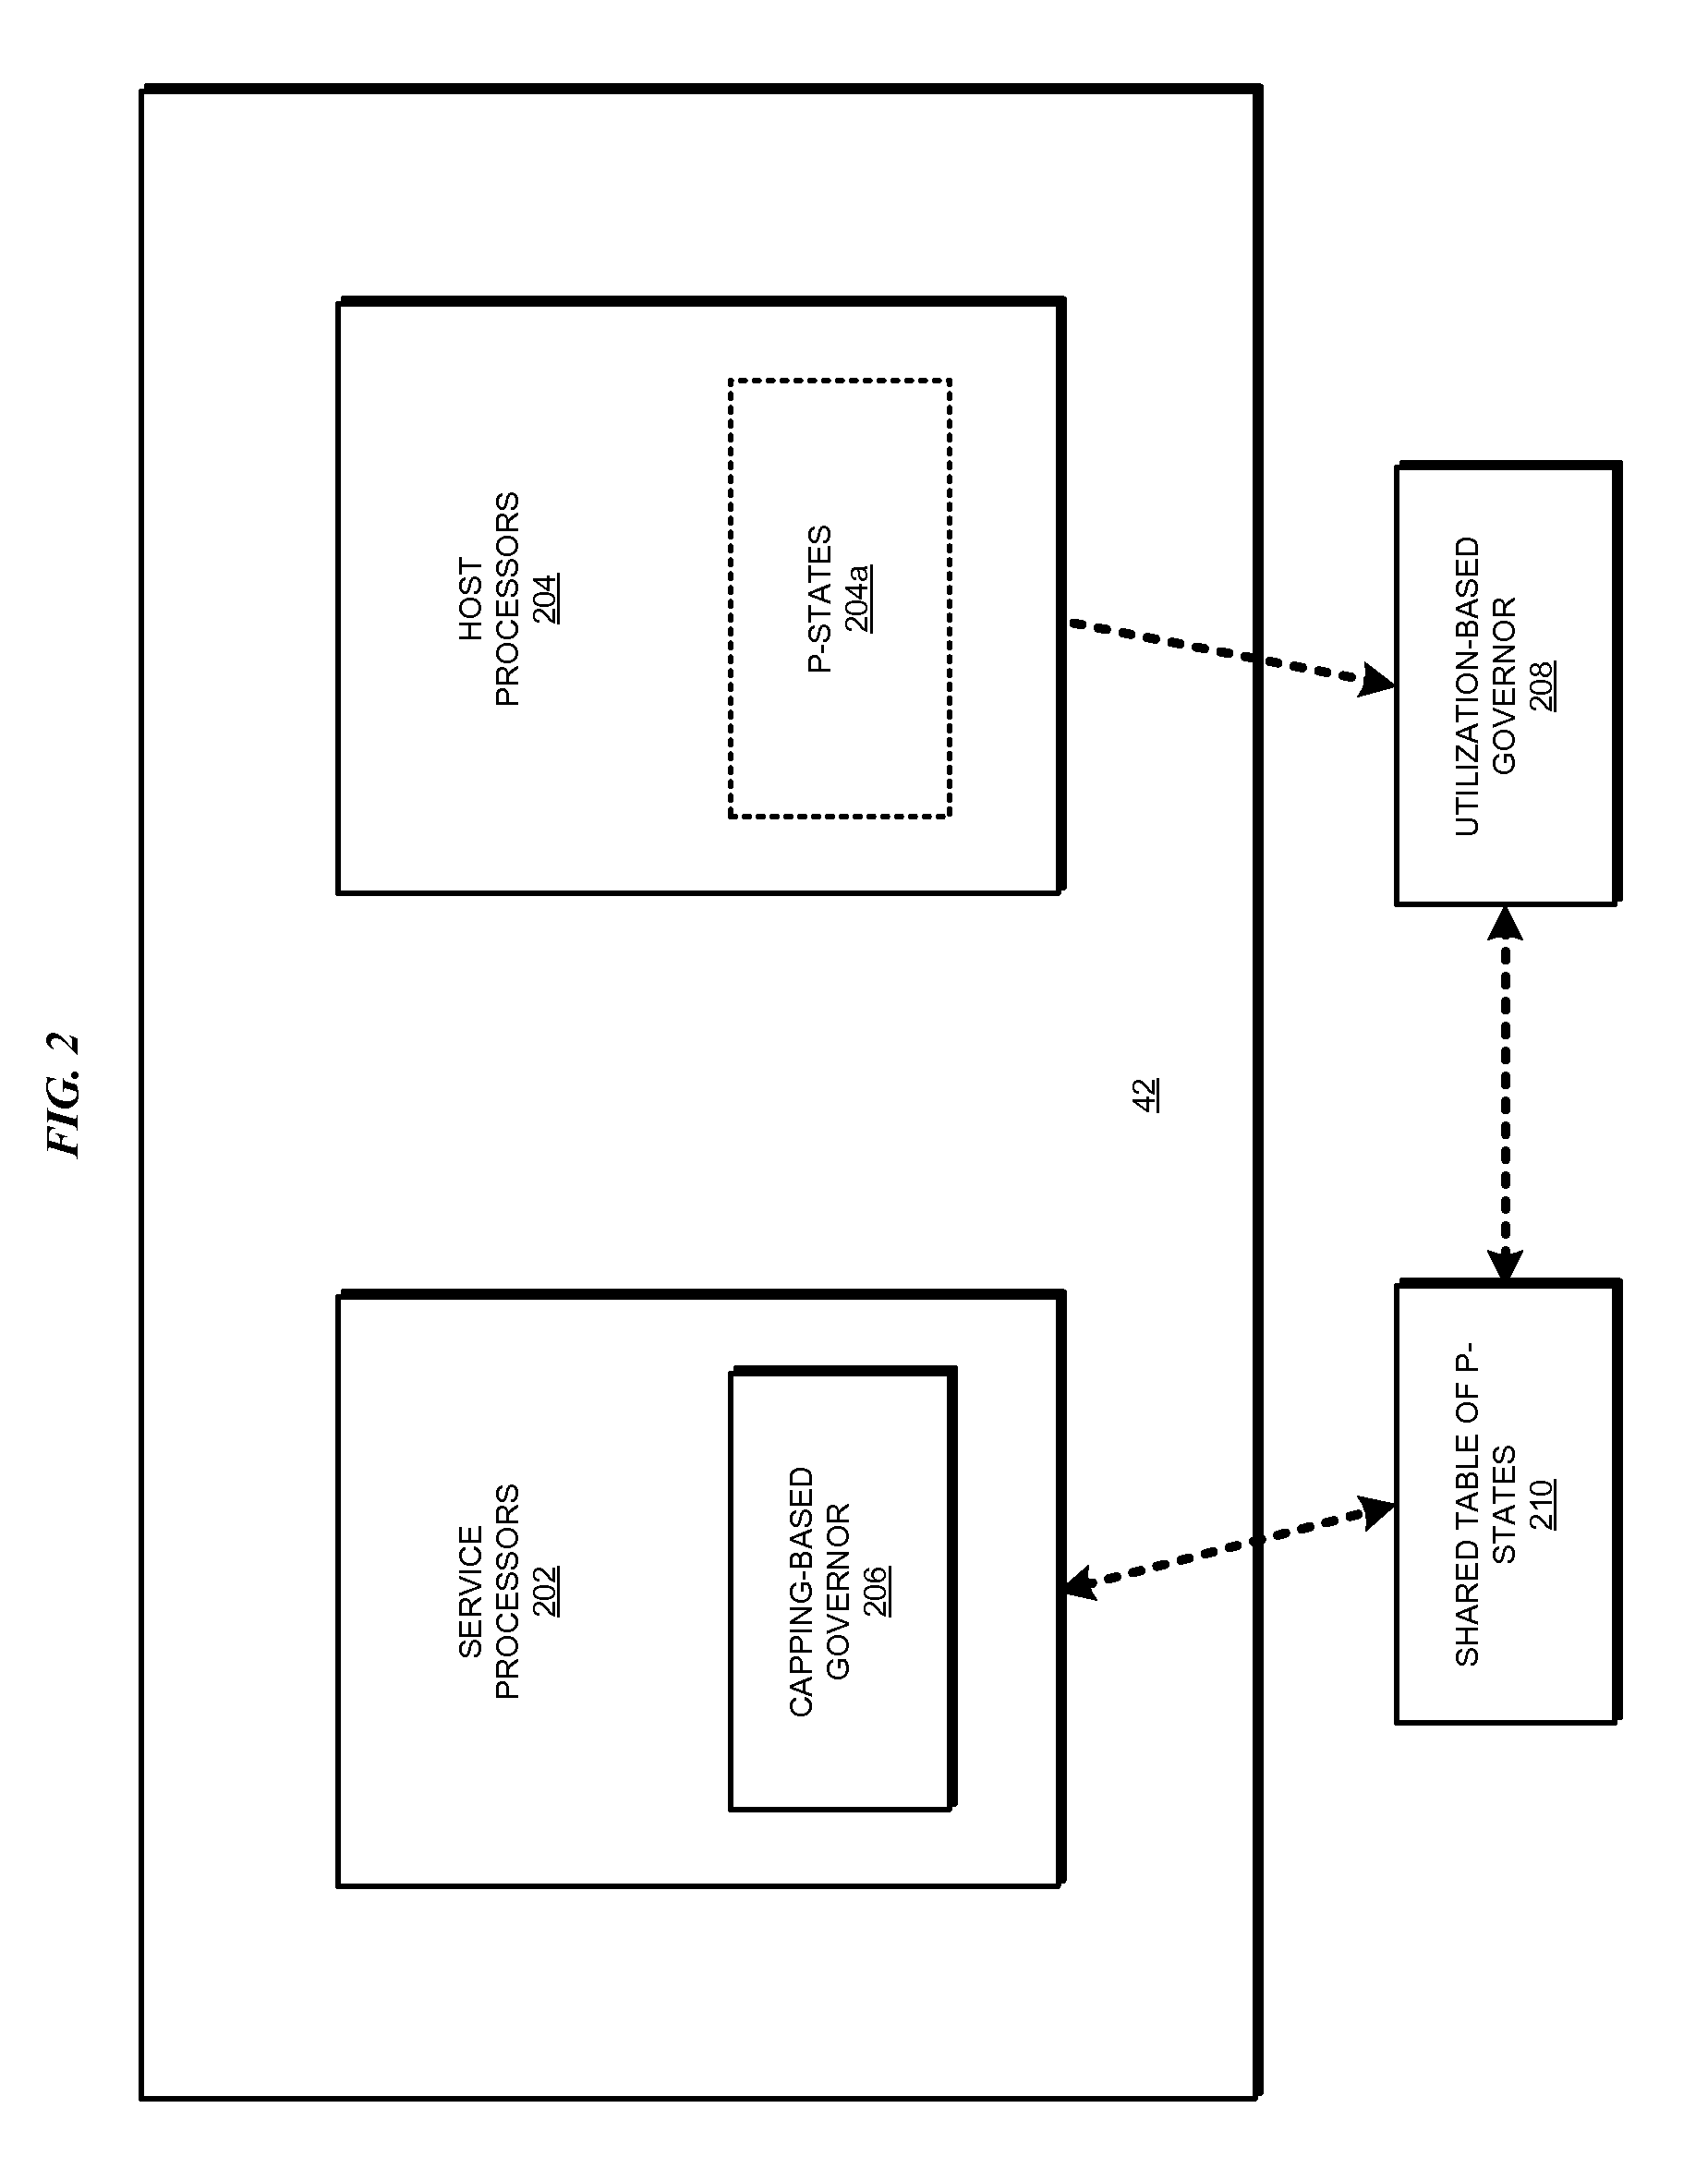 Method for power capping with co-operative dynamic voltage and frequency scaling via shared p-state table